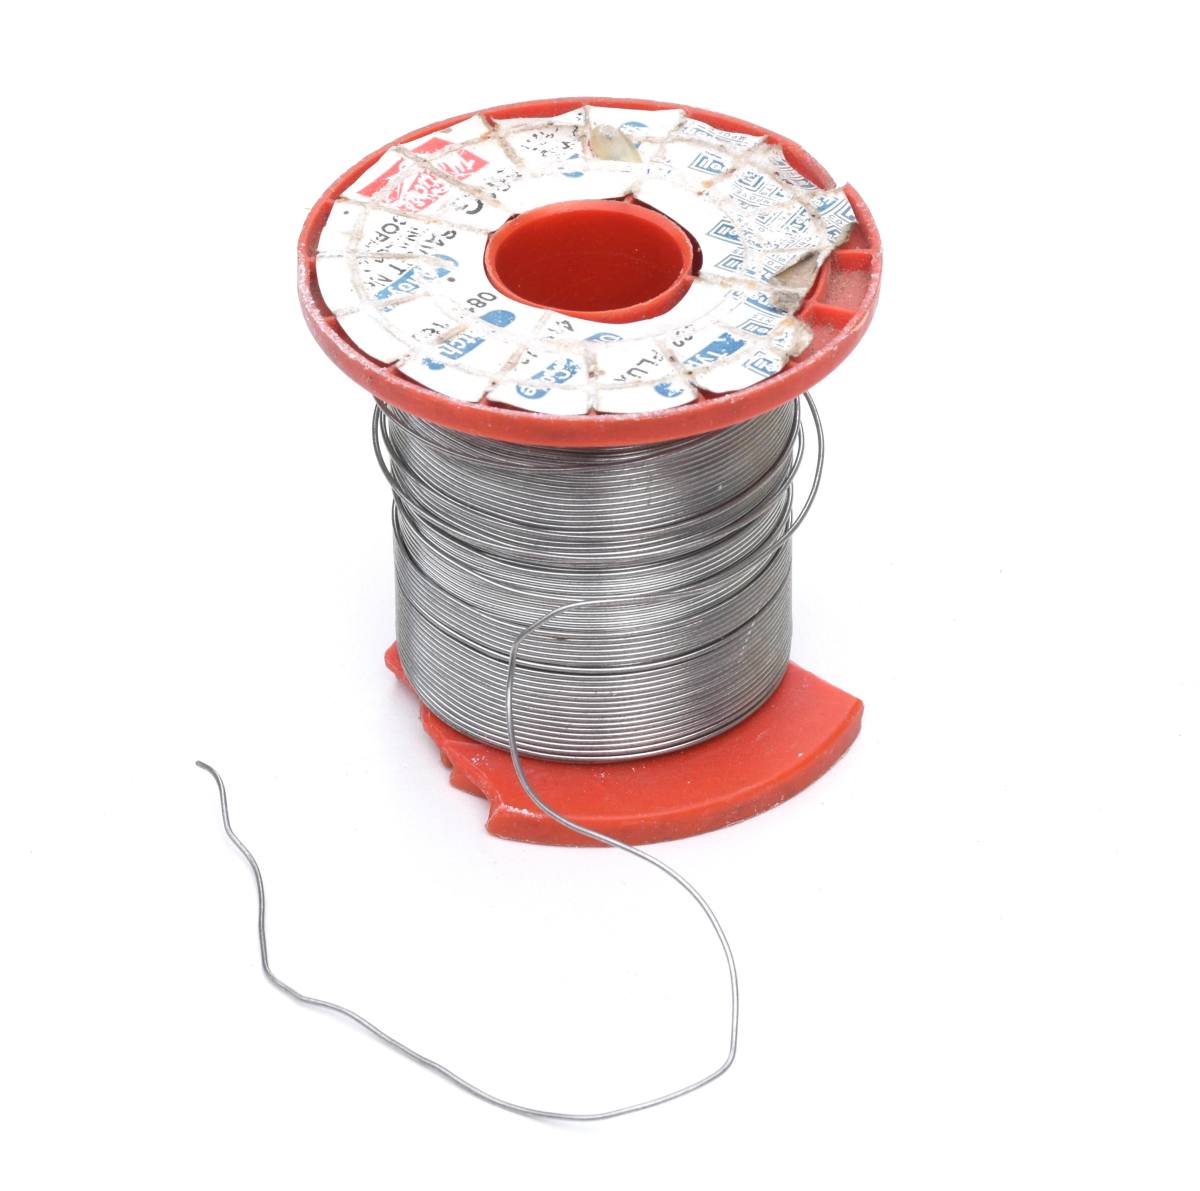 A roll of solder wire.